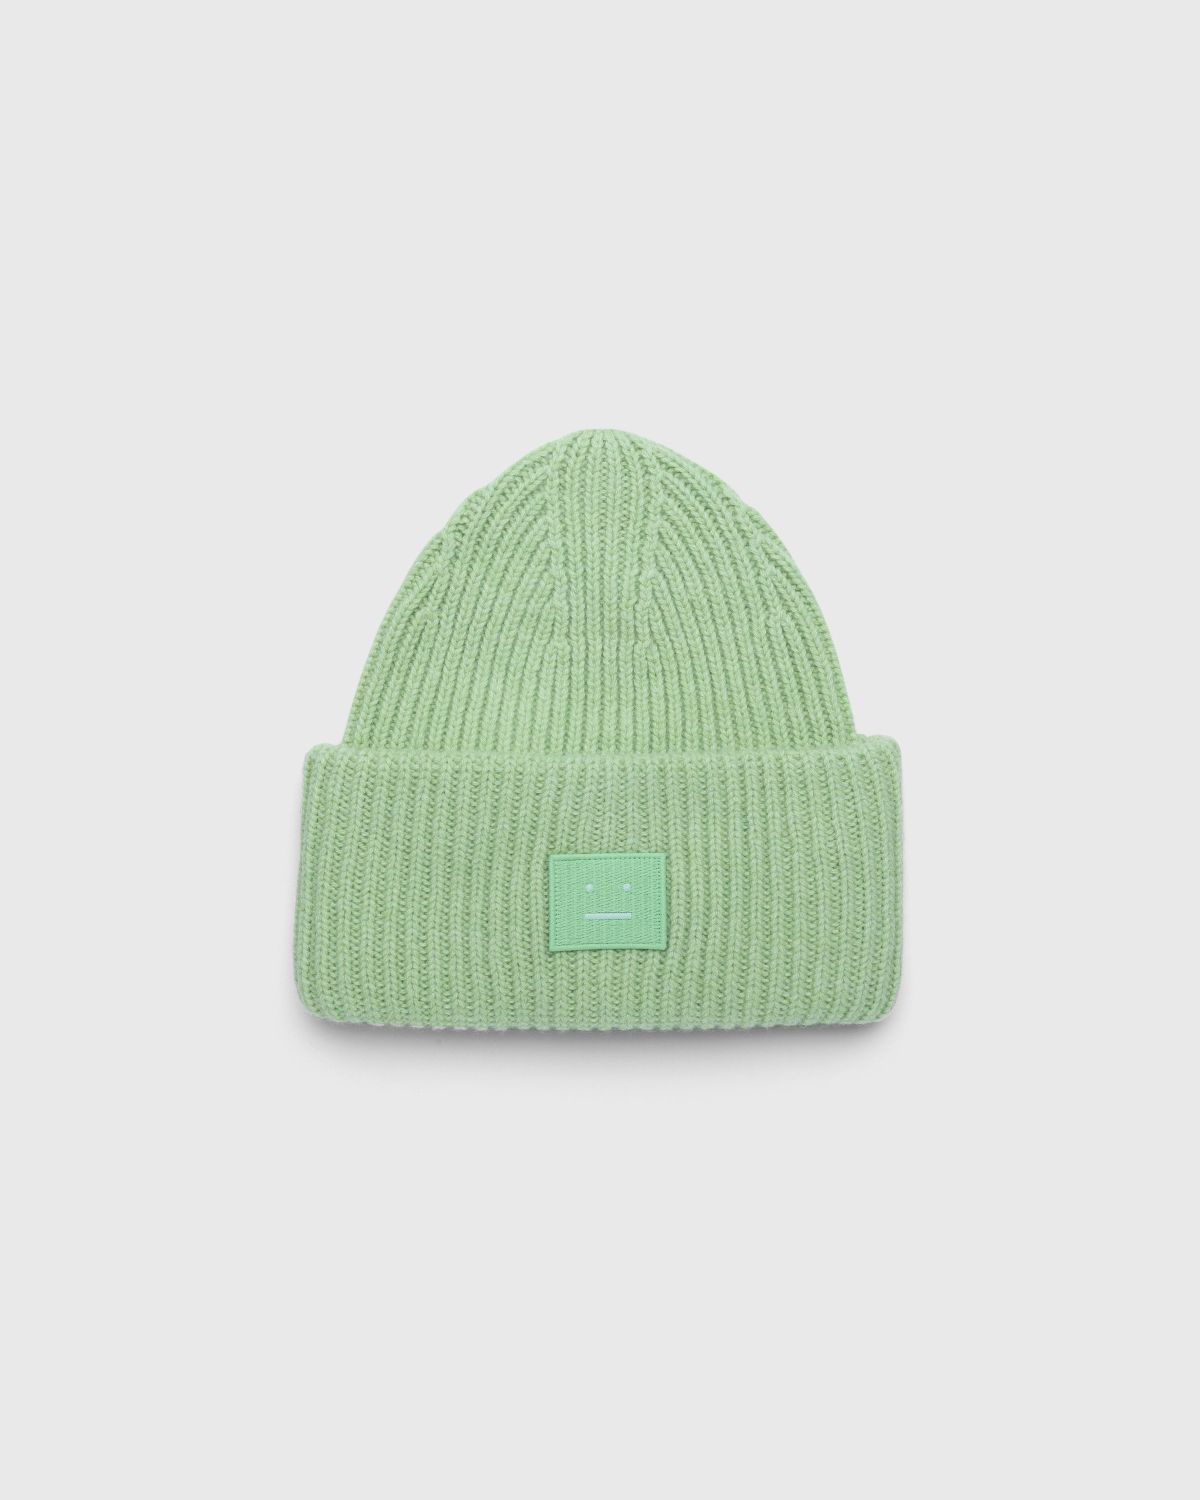 Acne Studios – Knit Face Patch Beanie Pale Green - Beanies - Green - Image 1